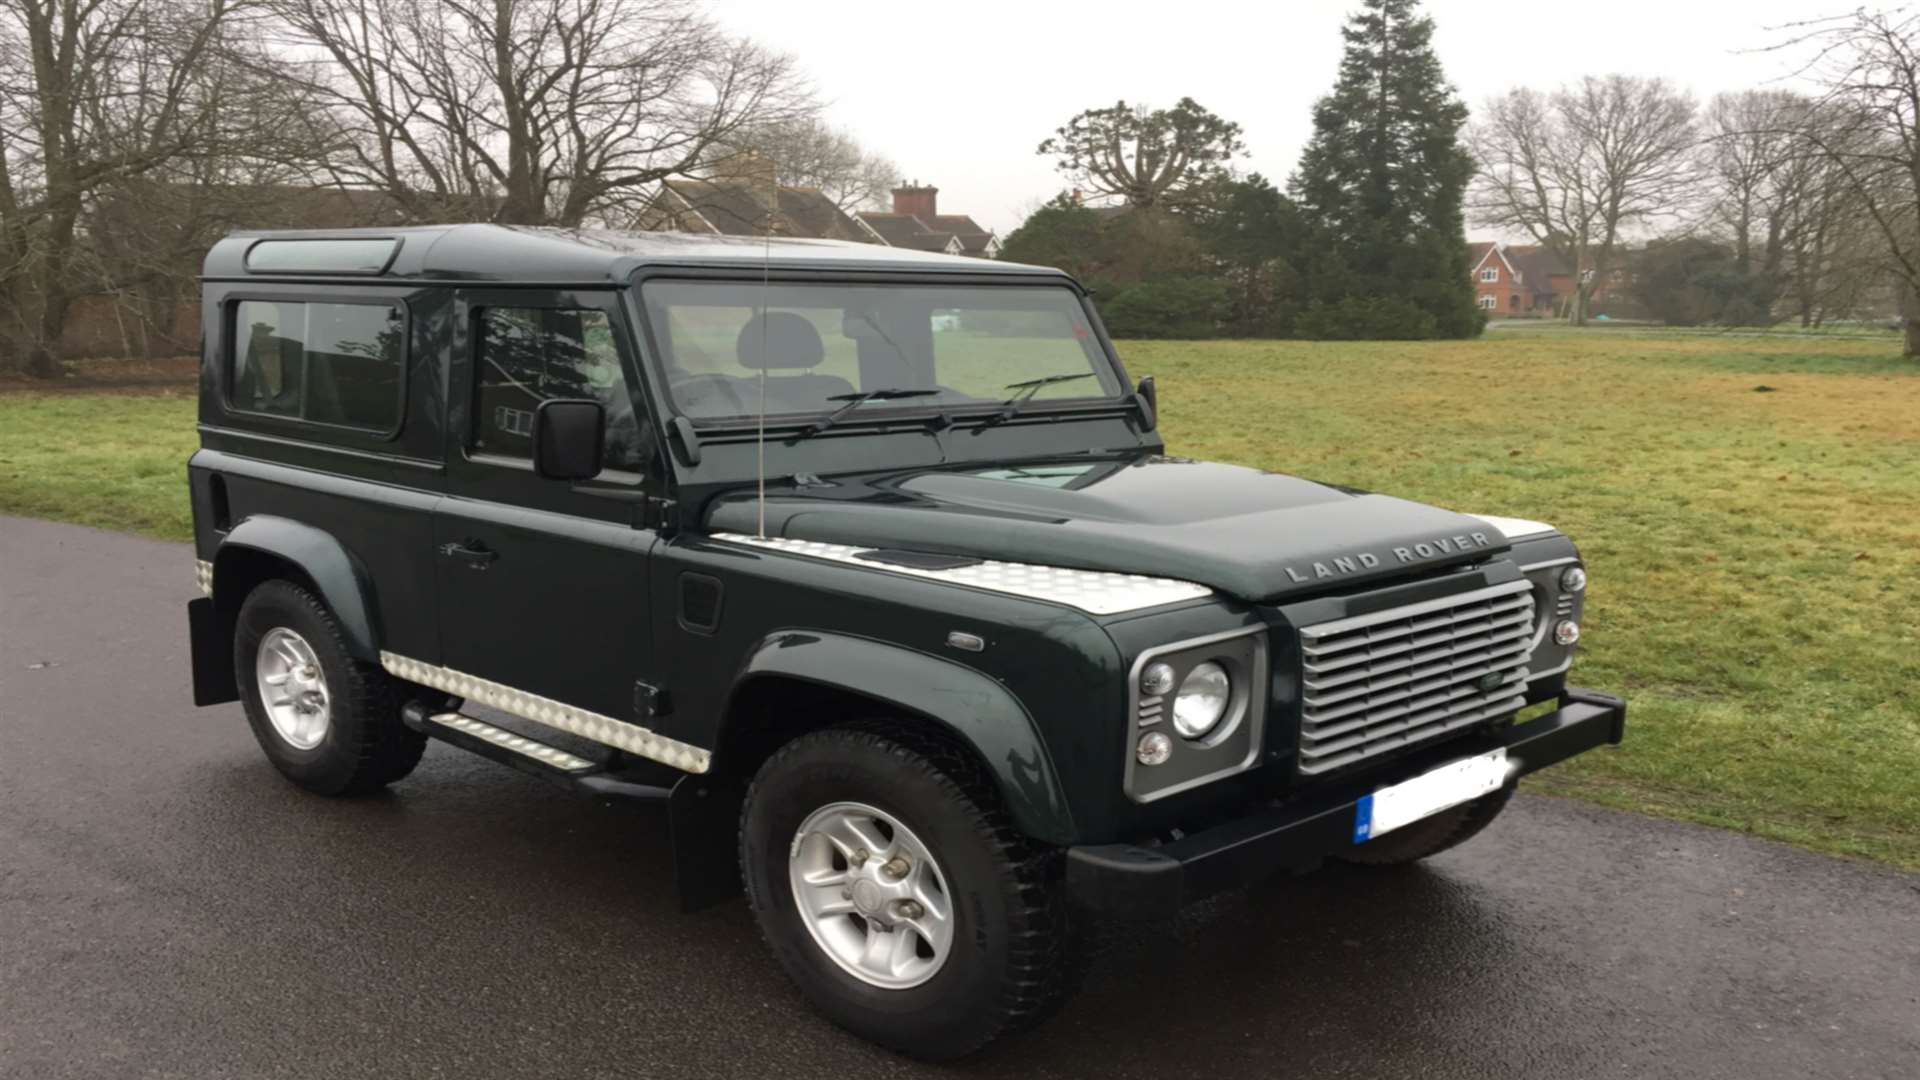 The Land Rover was left in a car park close to Hildenborough train station, in Tonbridge.